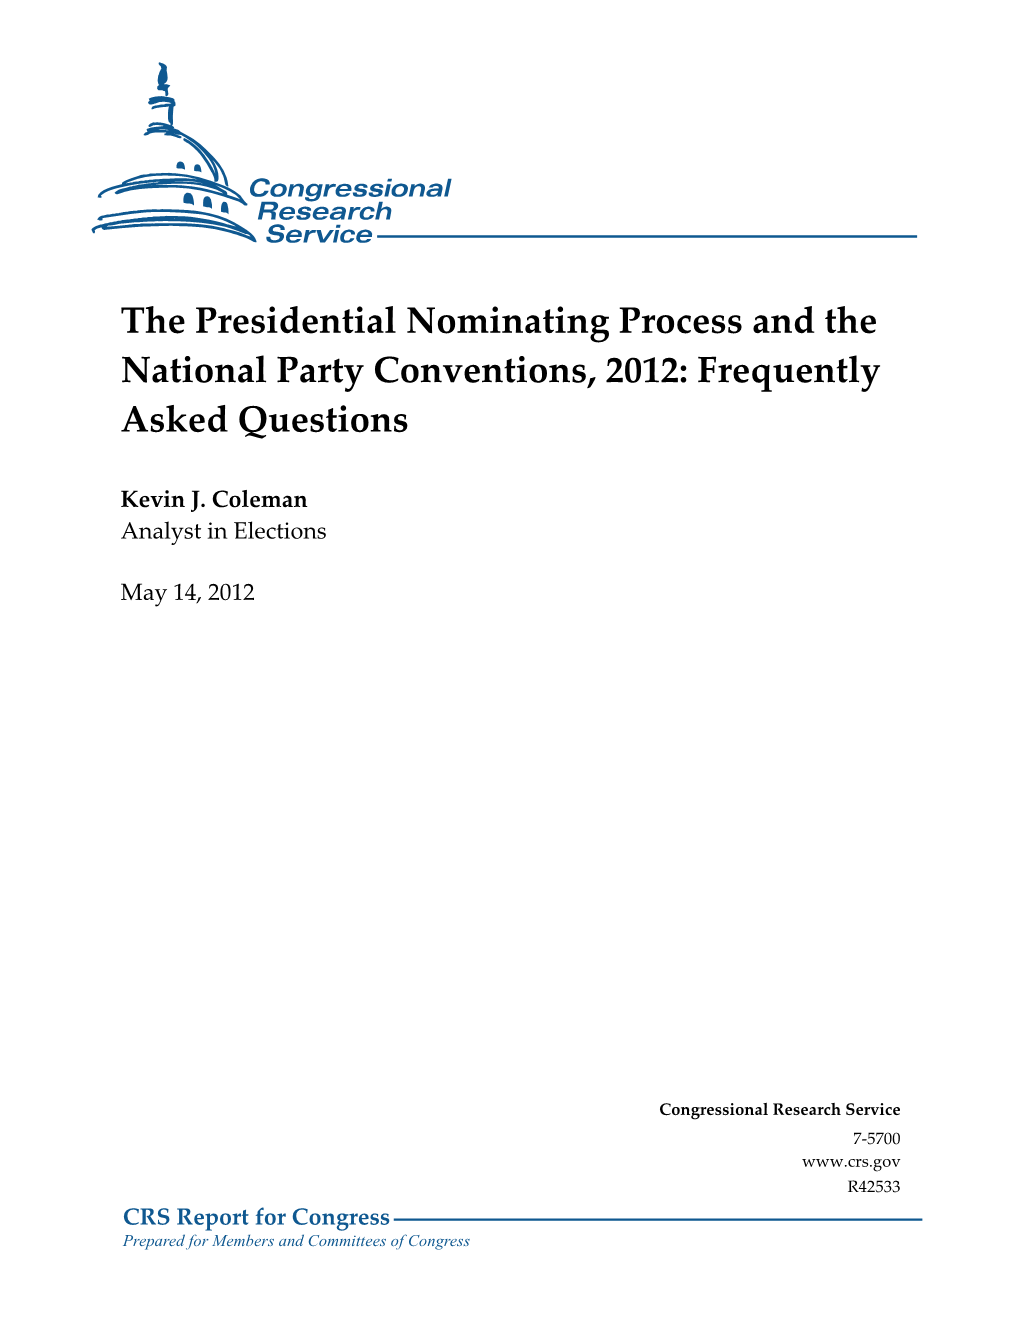 The Presidential Nominating Process and the National Party Conventions, 2012: Frequently Asked Questions